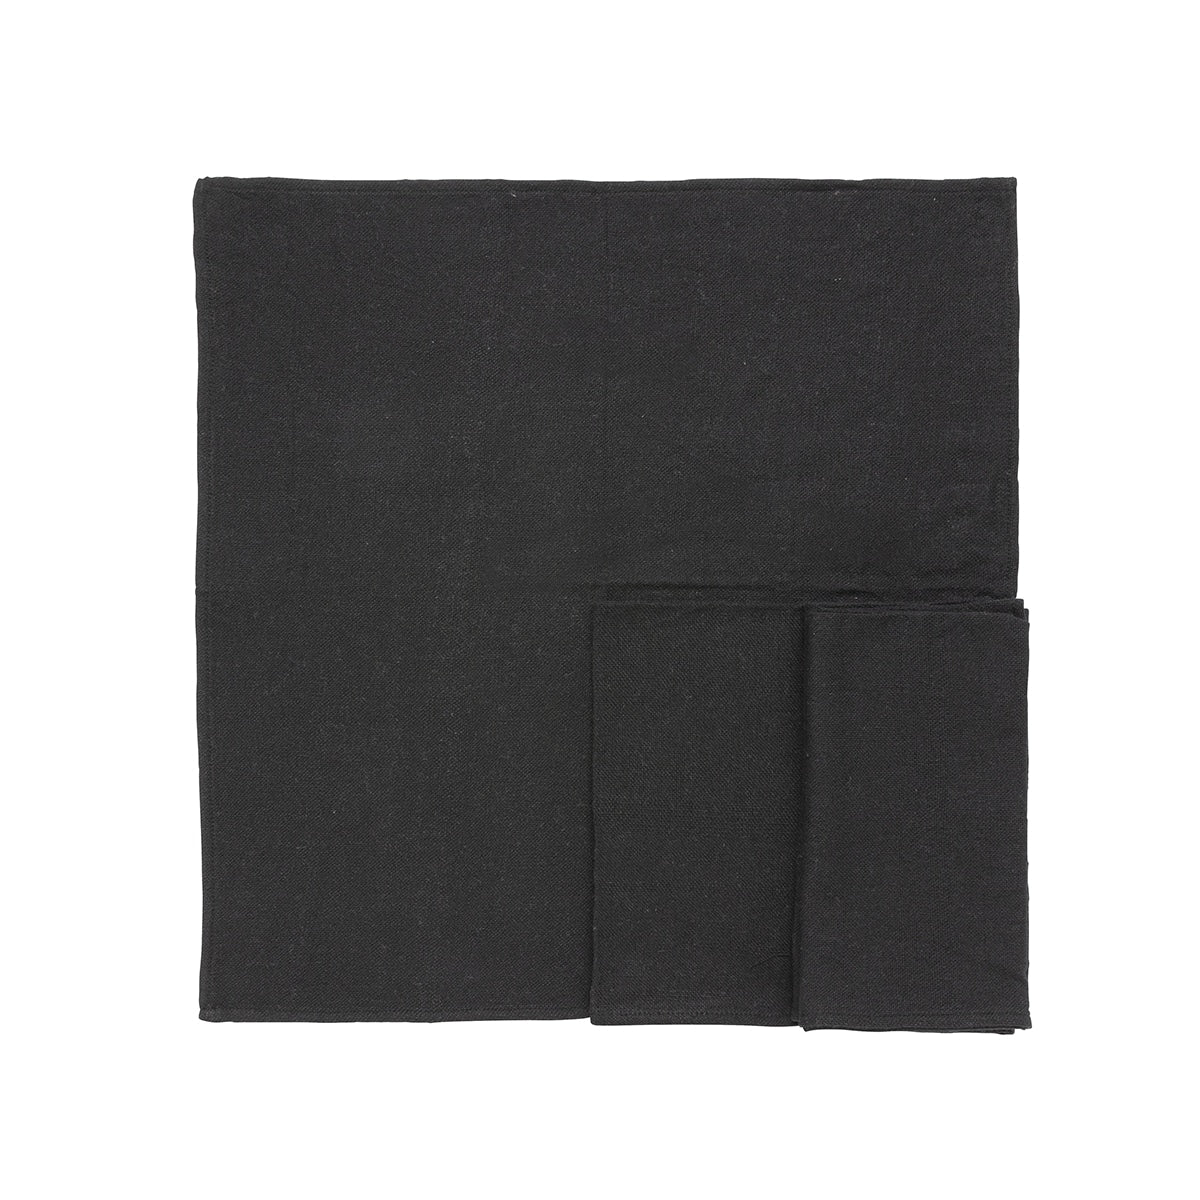 Black Cotton Napkins made from recycled cotton